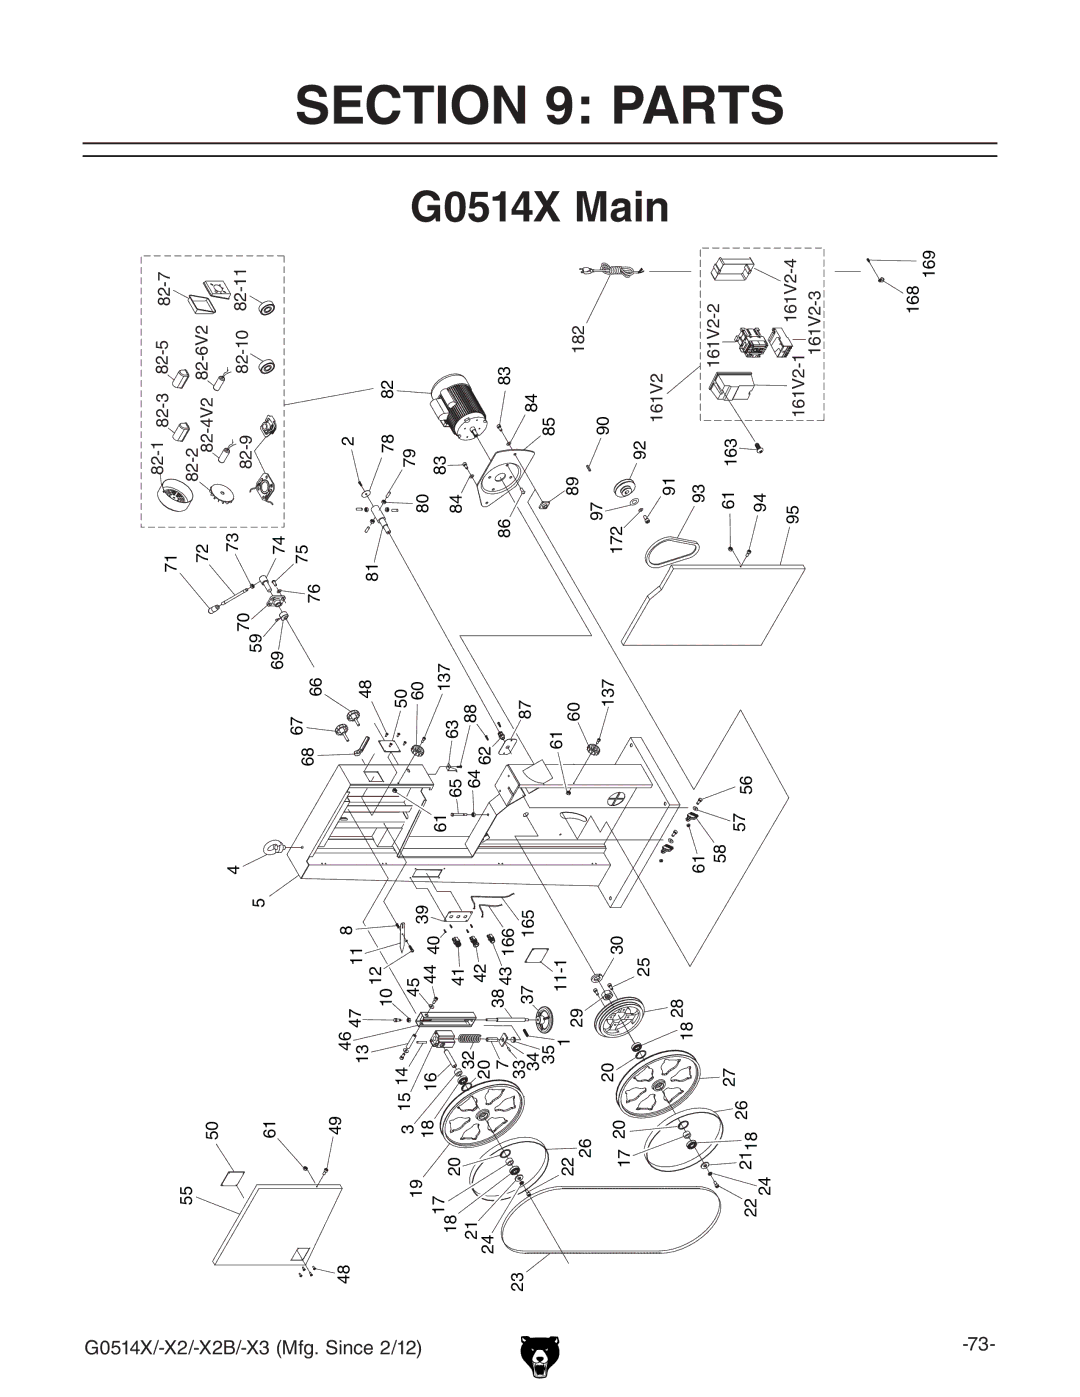 Grizzly owner manual Parts, G0514X Main 